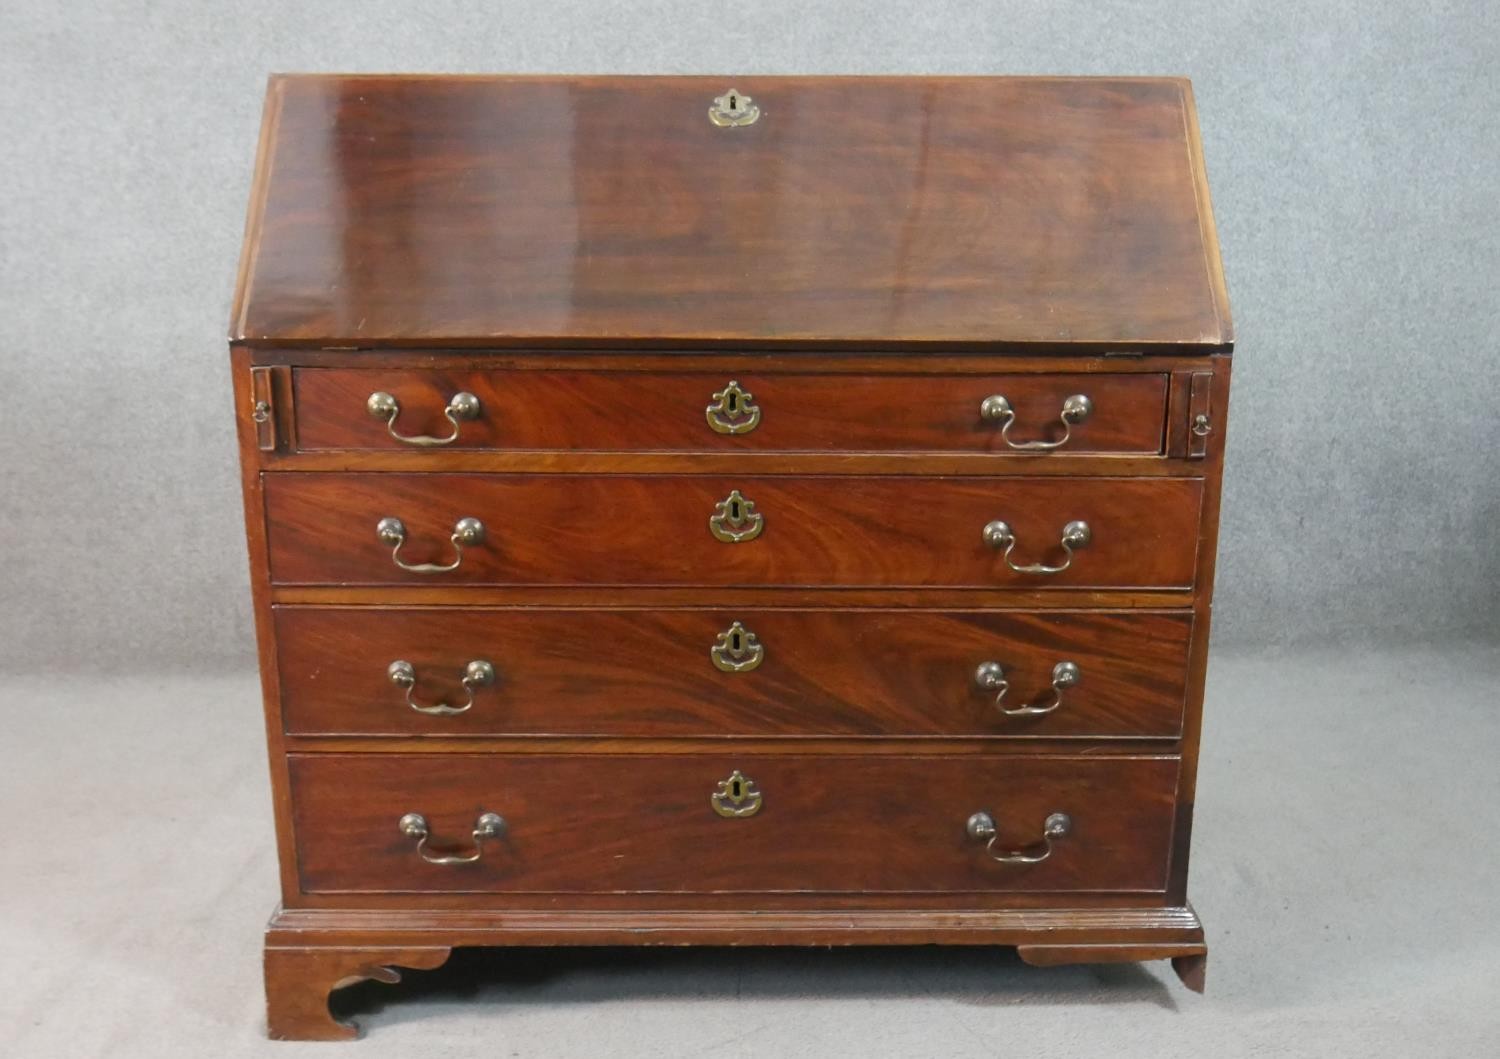 A George III mahogany bureau, the fall front opening to reveal a central cupboard door, drawers